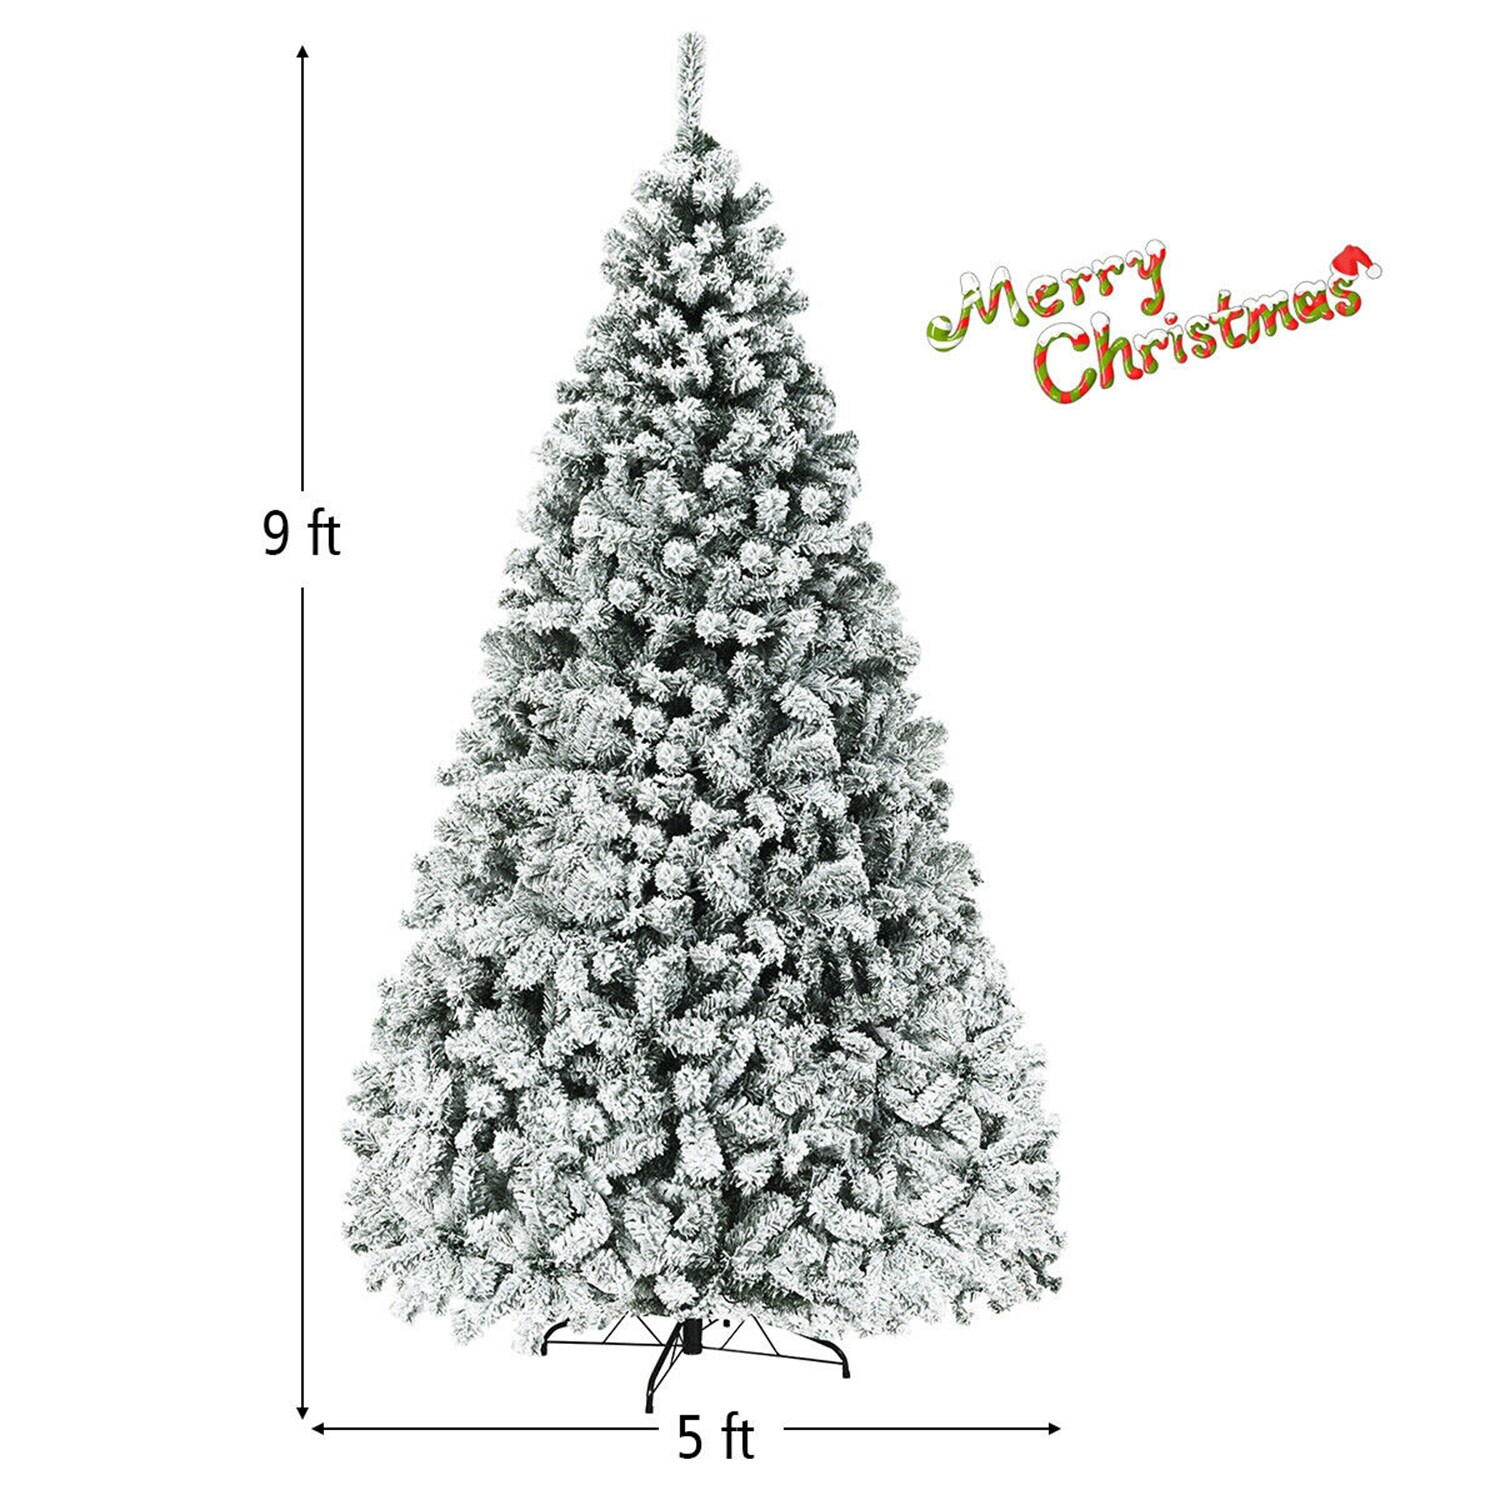 WELLFOR 9-ft Pre-lit Flocked Artificial Christmas Tree with LED Lights ...